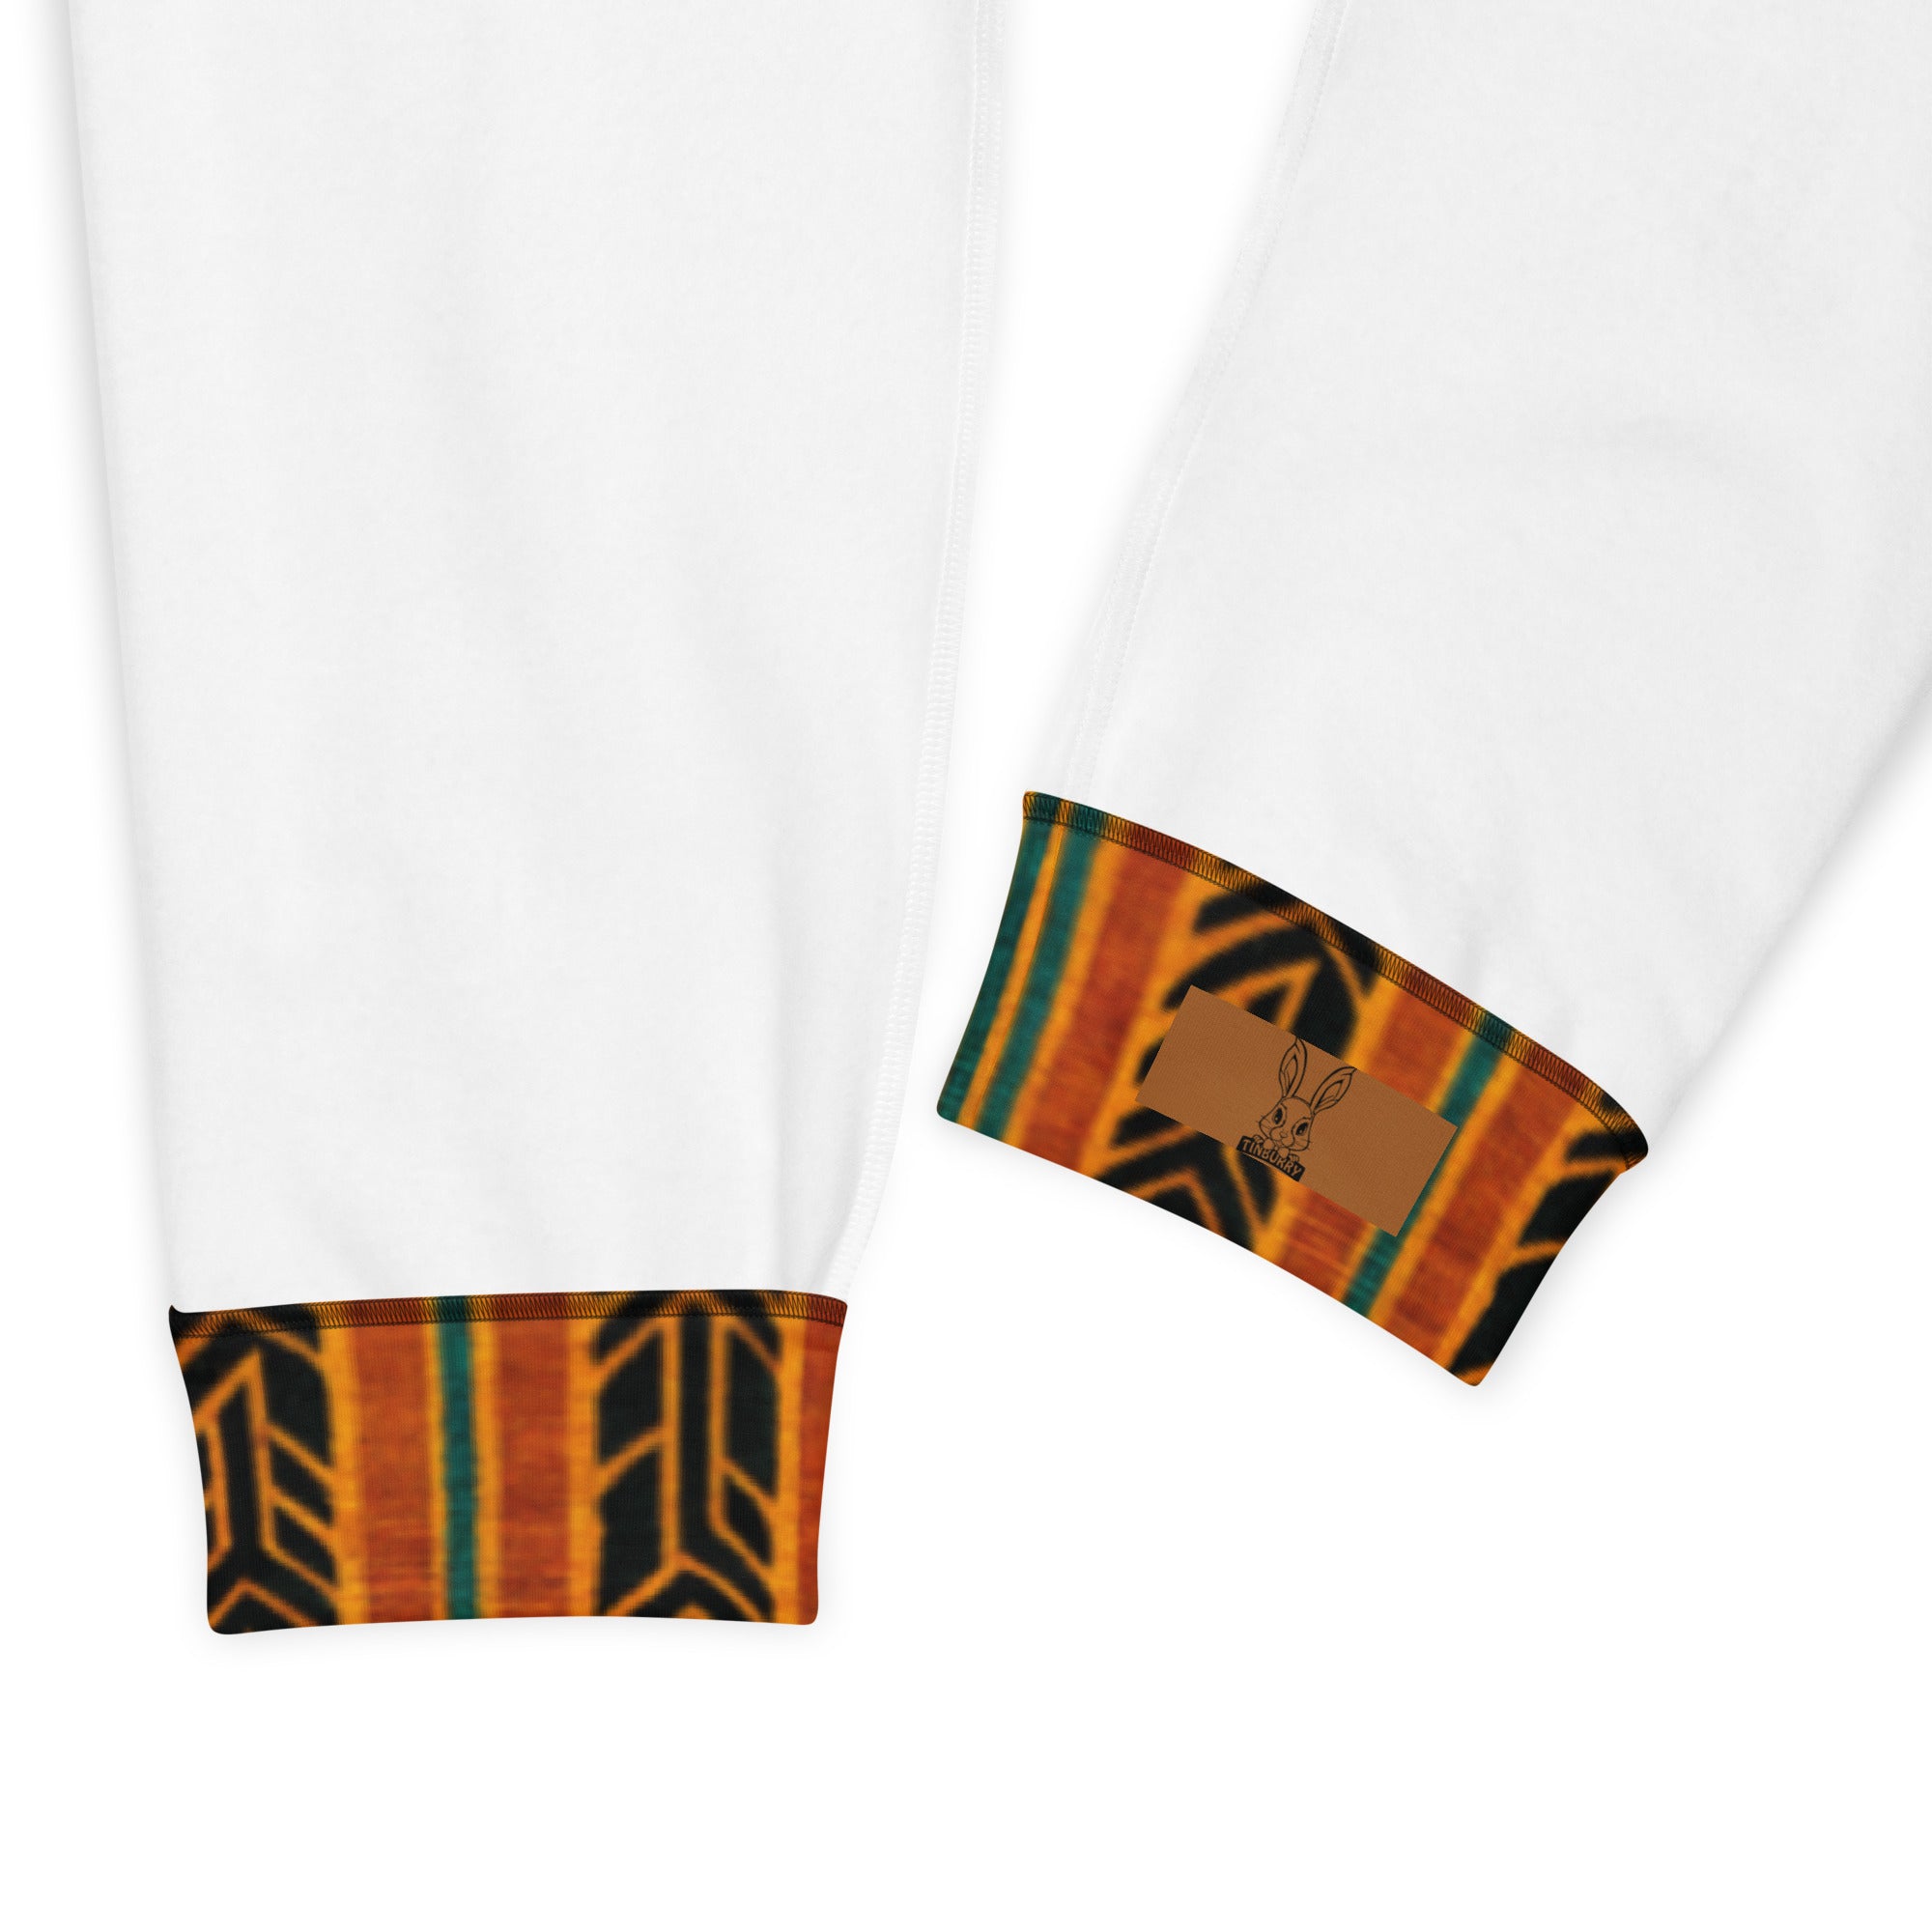 Back to Africa Men's Joggers